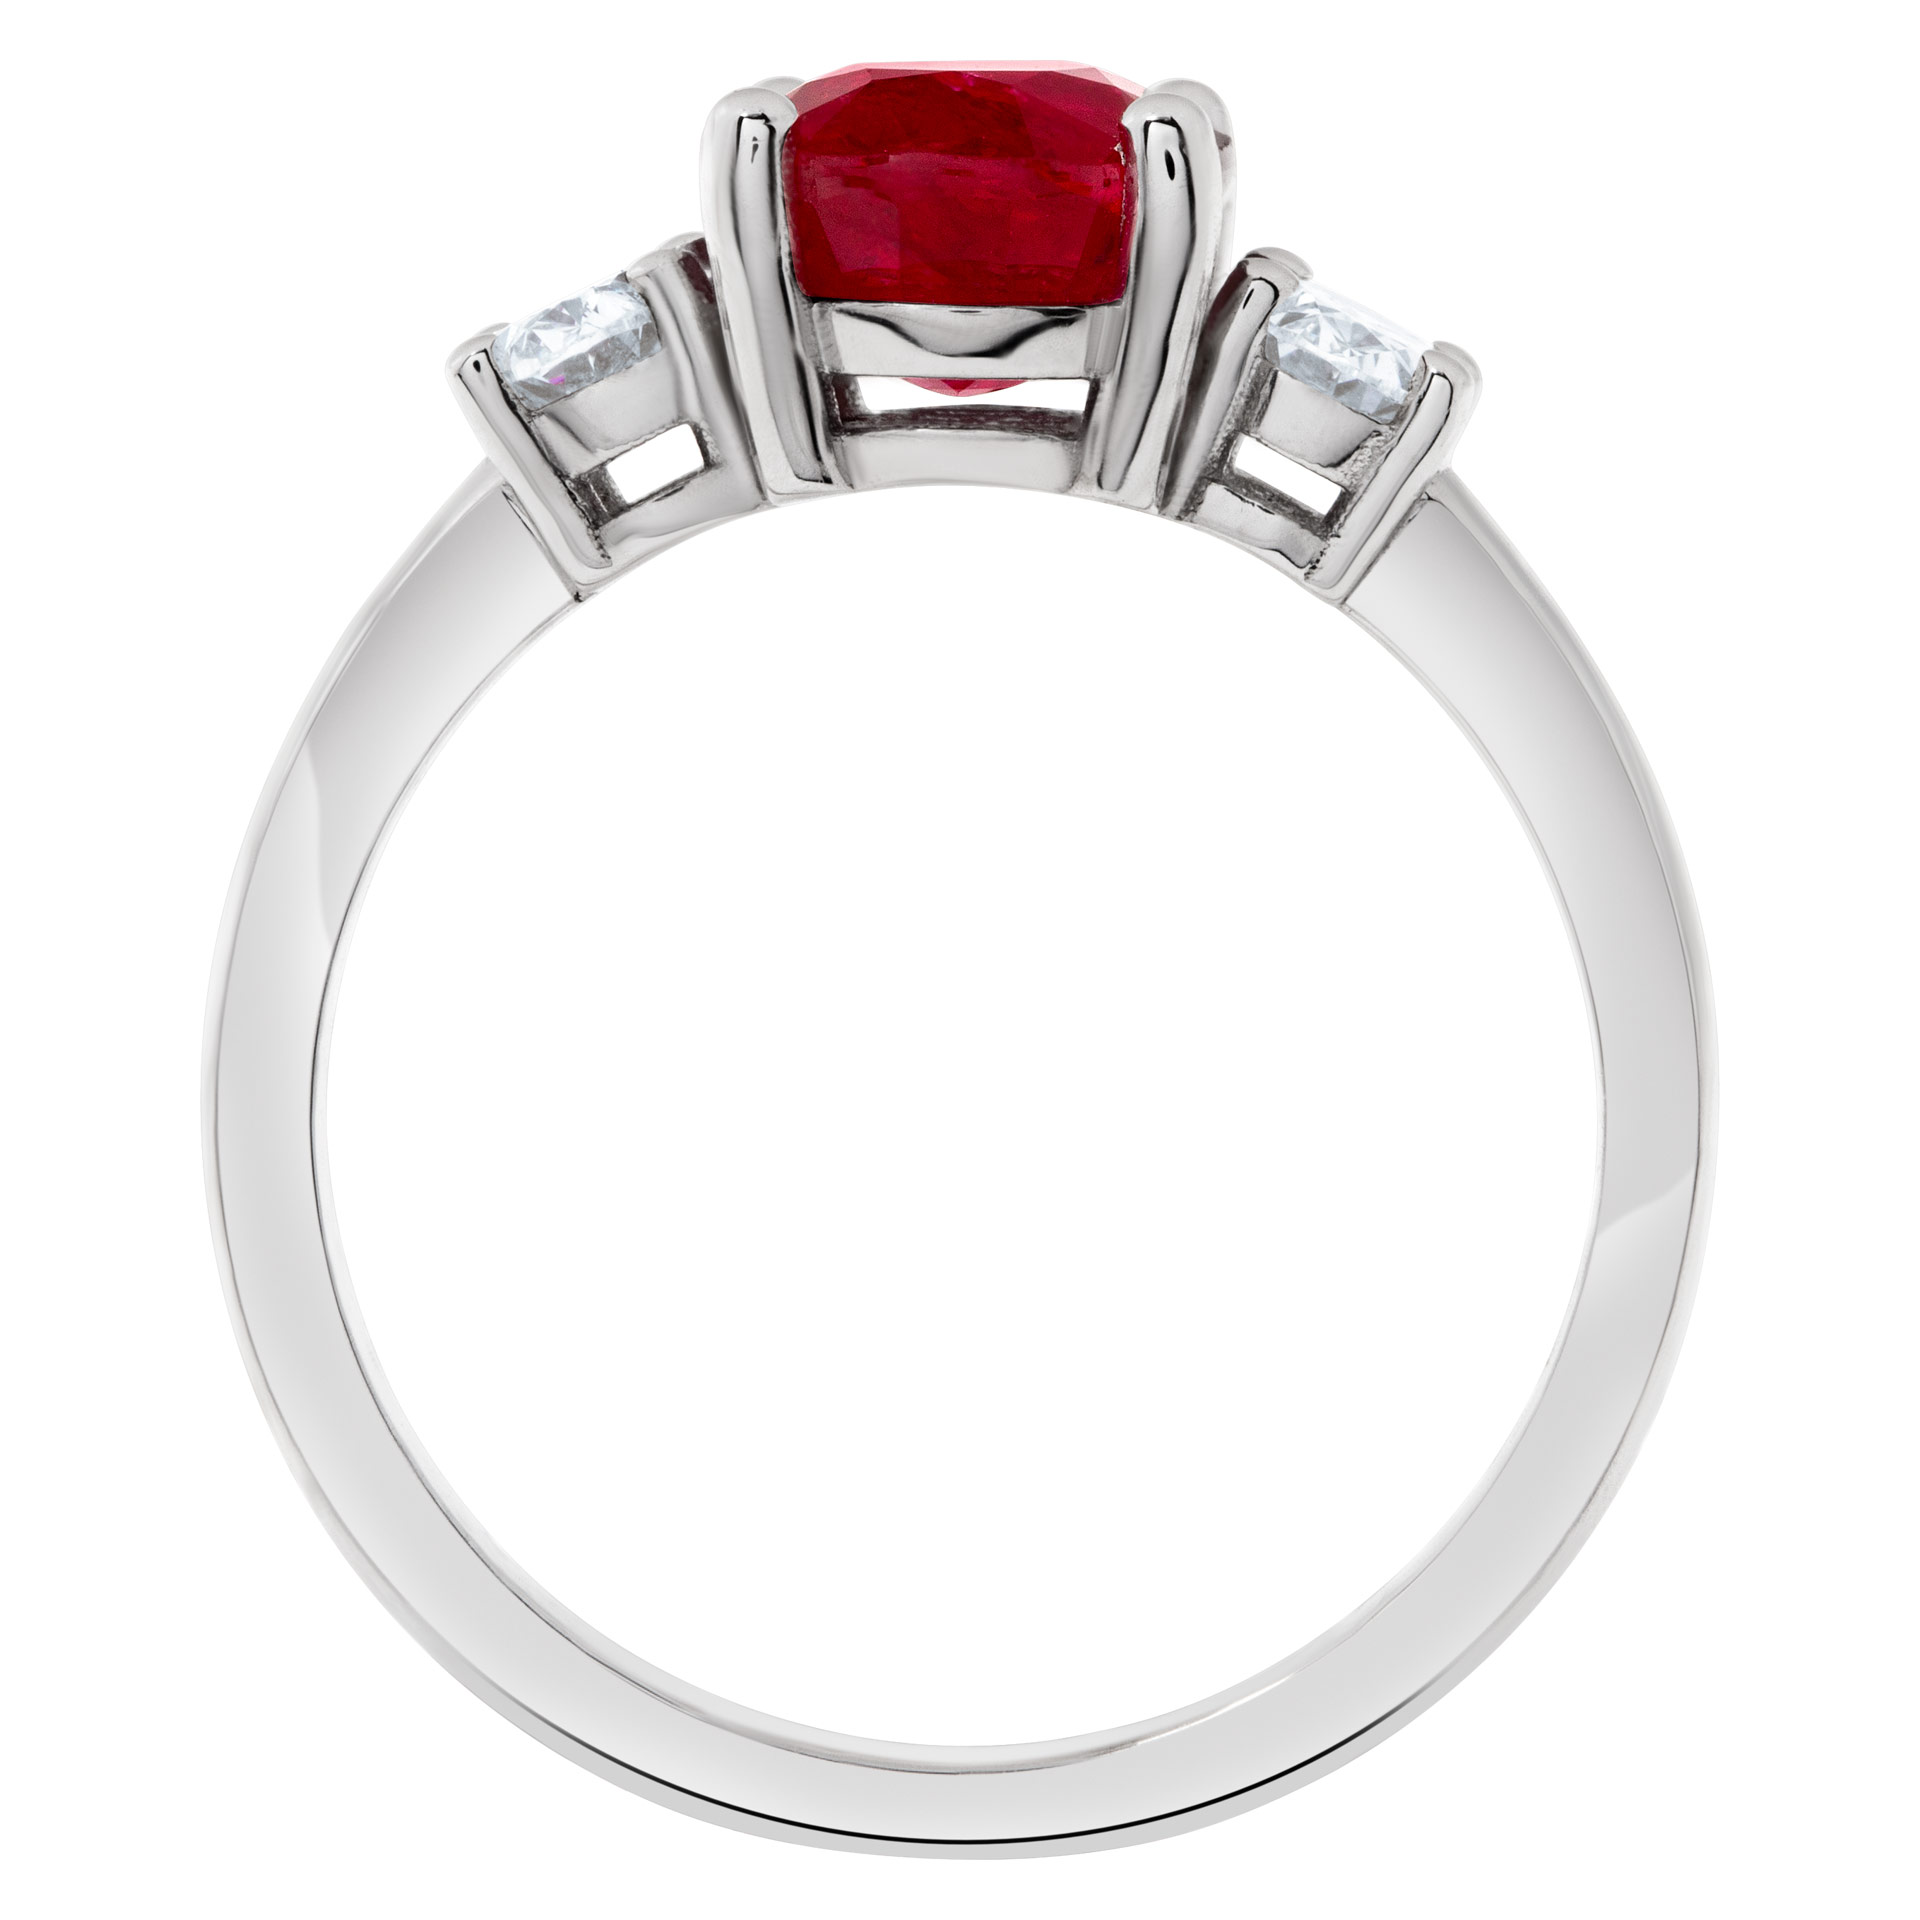 Diamond and ruby ring in platinum | Gray & Sons Jewelers